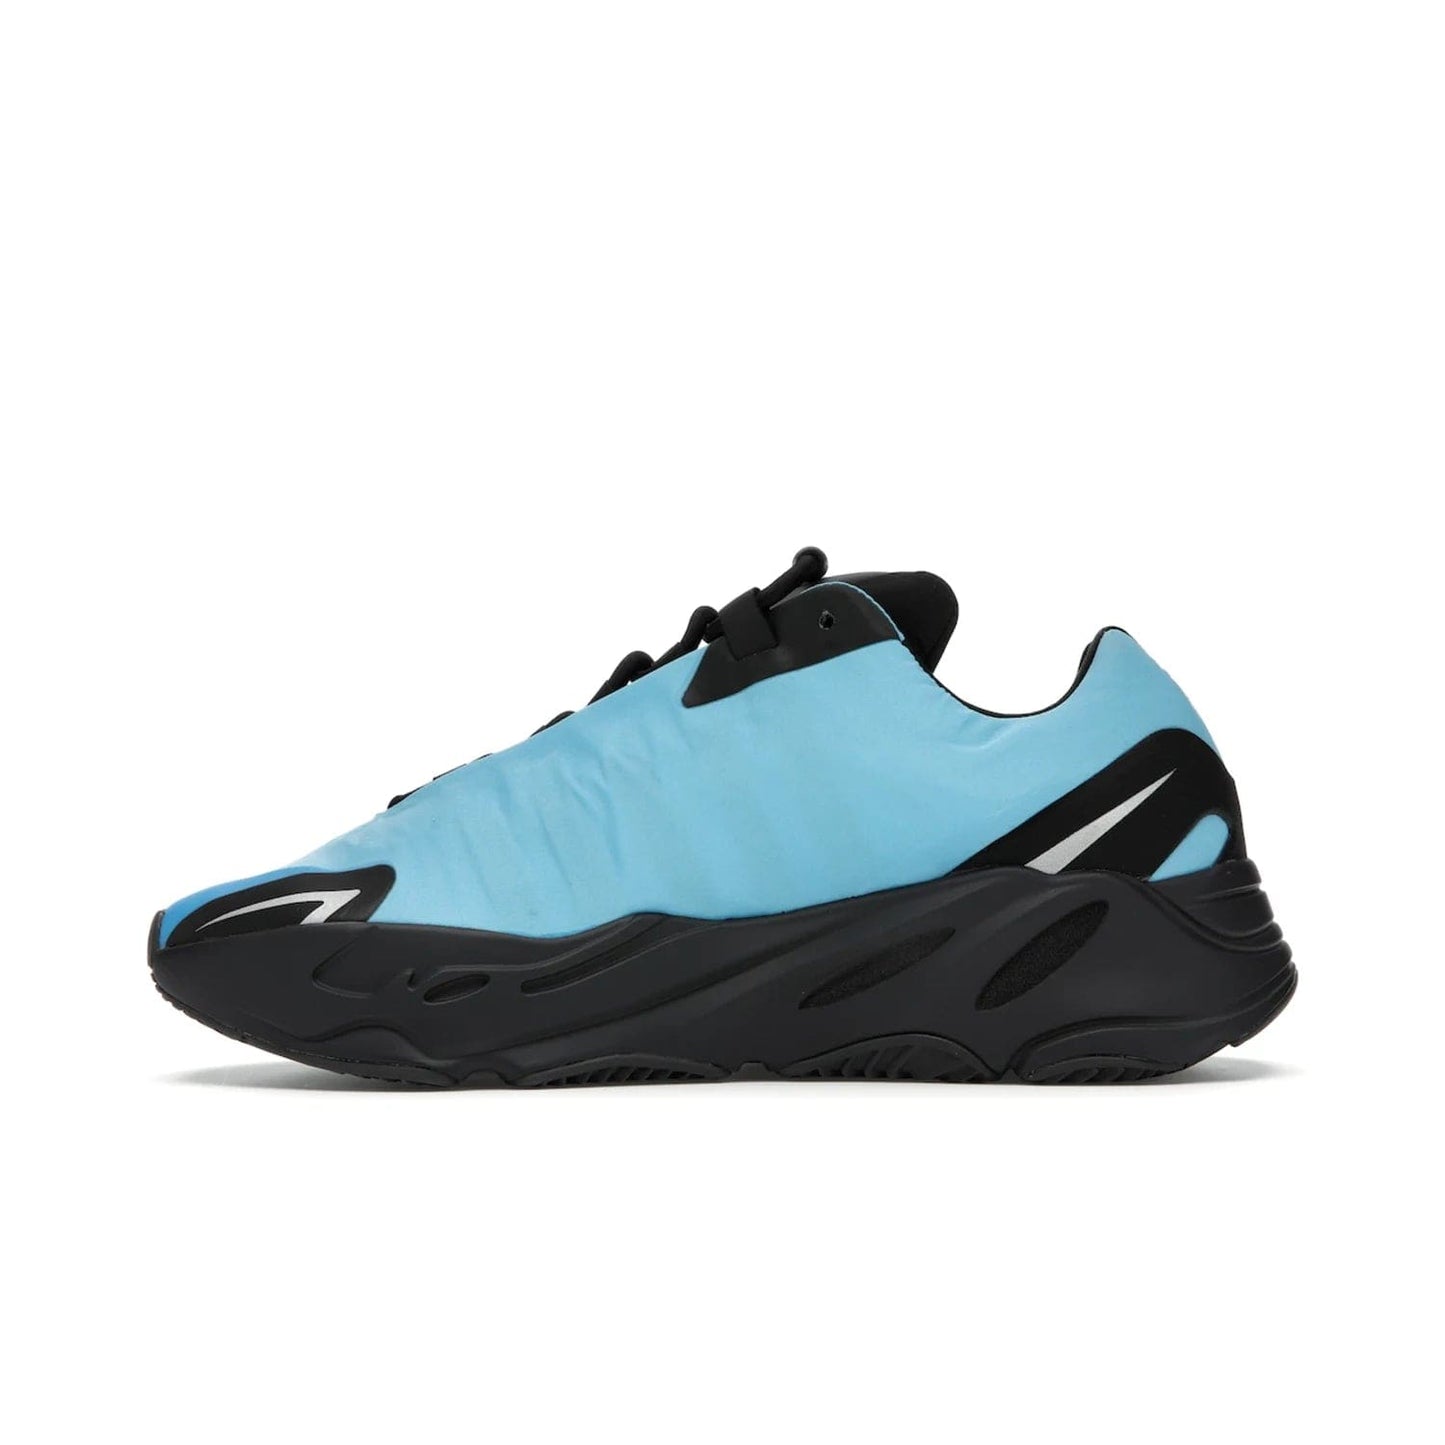 adidas Yeezy Boost 700 MNVN Bright Cyan - Image 19 - Only at www.BallersClubKickz.com - The adidas Yeezy Boost 700 MNVN features a Bright Cyan nylon upper with iconic "700" graphics and a sculptural black Boost sole for superior style and comfort. Step into legendary style and comfort in June 2021.